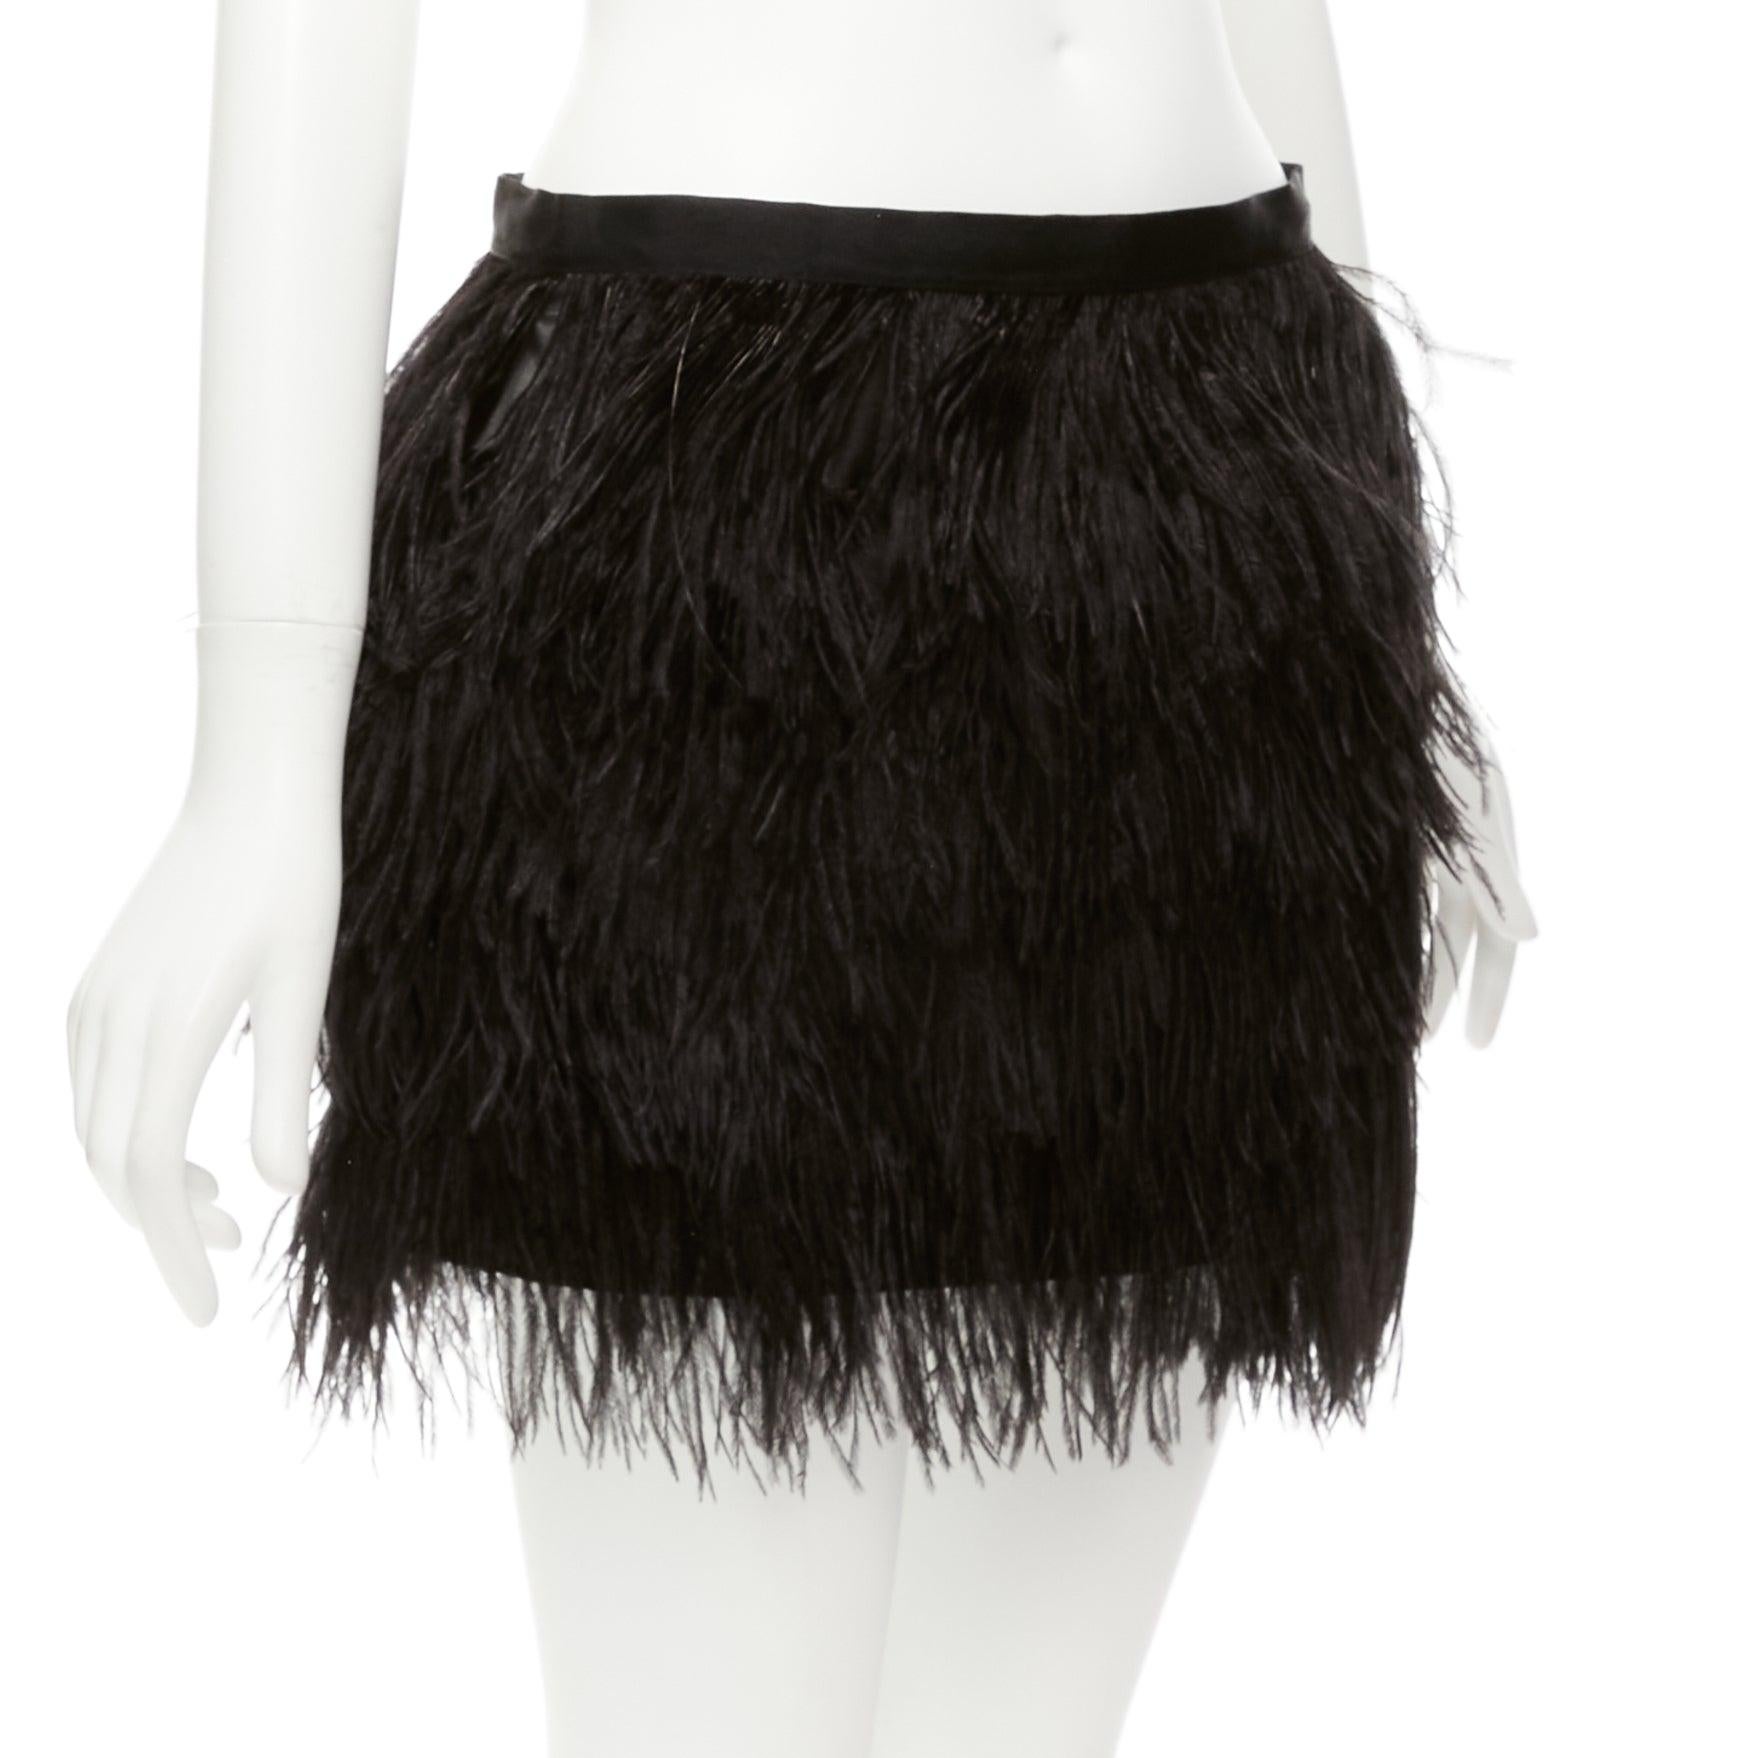 HAUTE HIPPIE black rooster feather silk lined mid waist mini skirt XS
Reference: NKLL/A00221
Brand: Haute Hippie
Material: Feather
Color: Black
Pattern: Feather
Closure: Zip
Lining: Black Silk
Extra Details: Domesticated rooster feather. Silk lined.